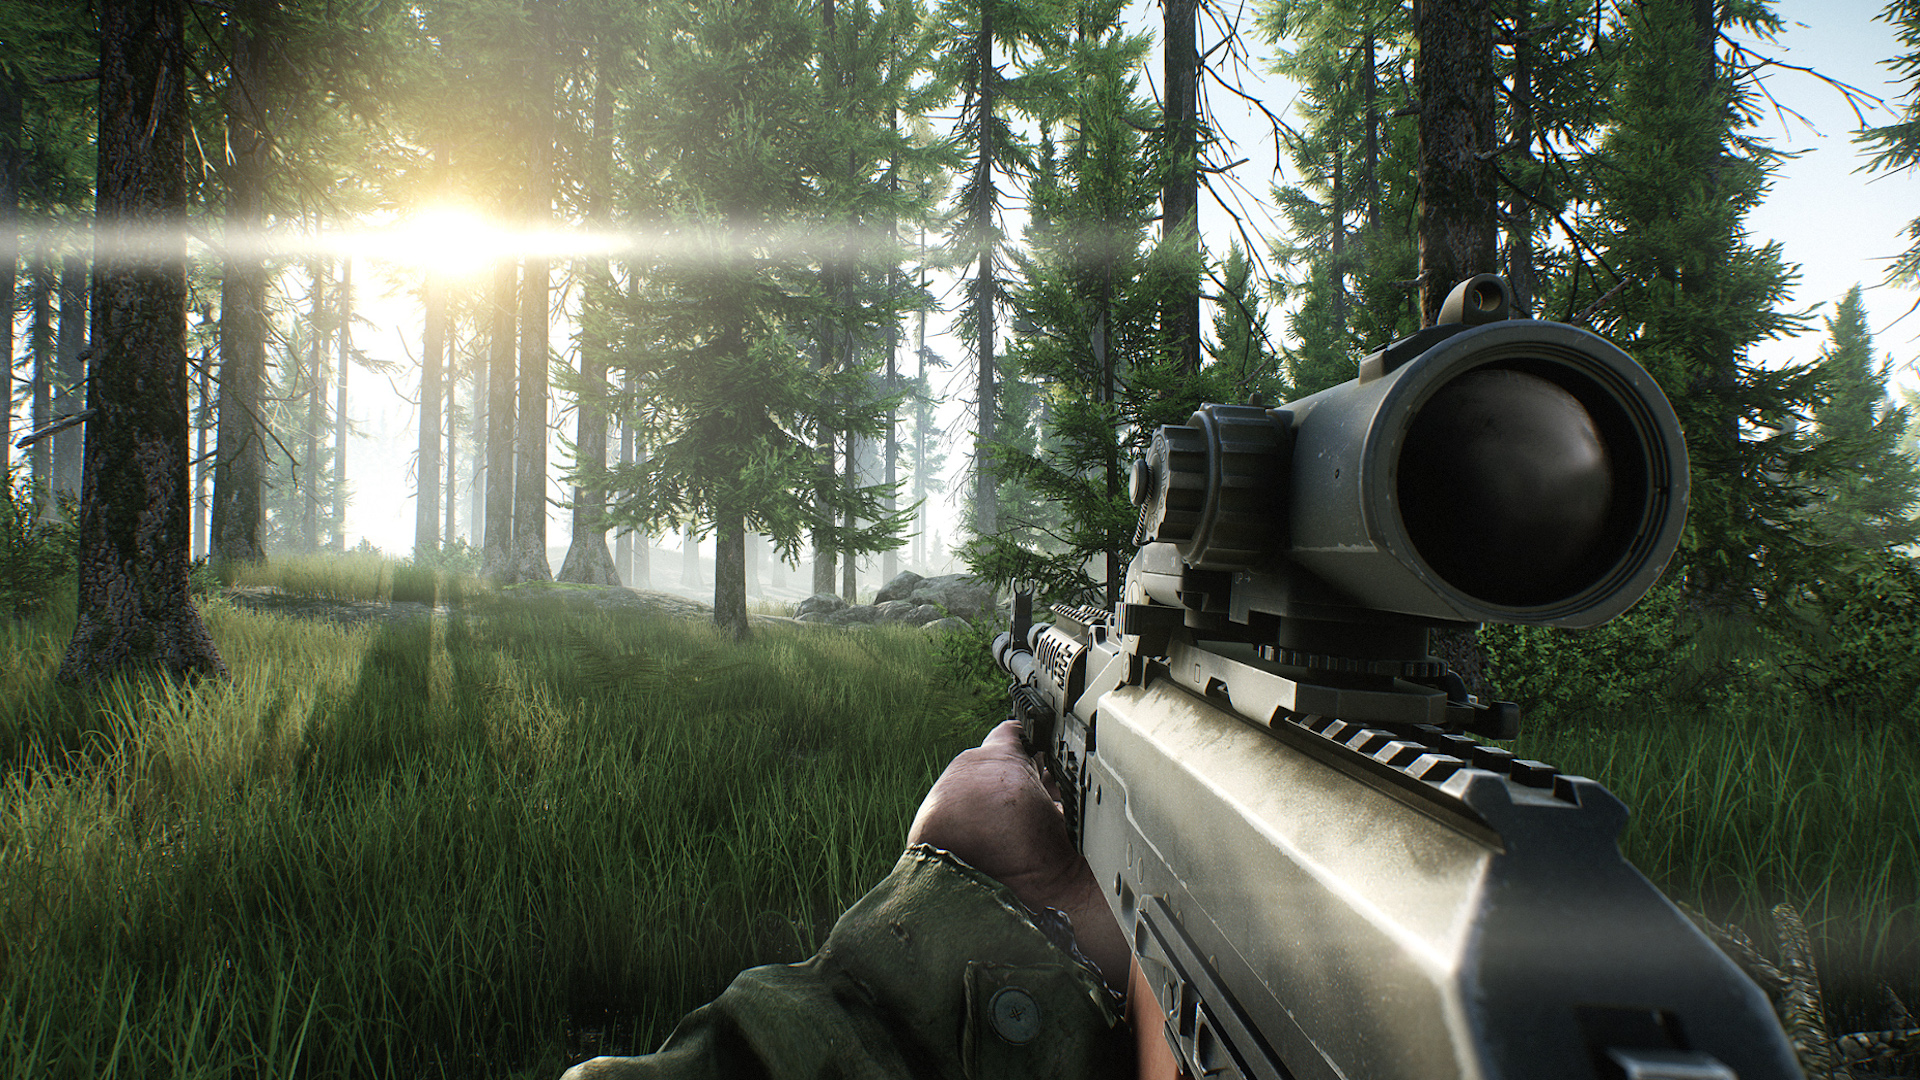 Escape From Tarkov beginner's guide: What is EFT, how to play